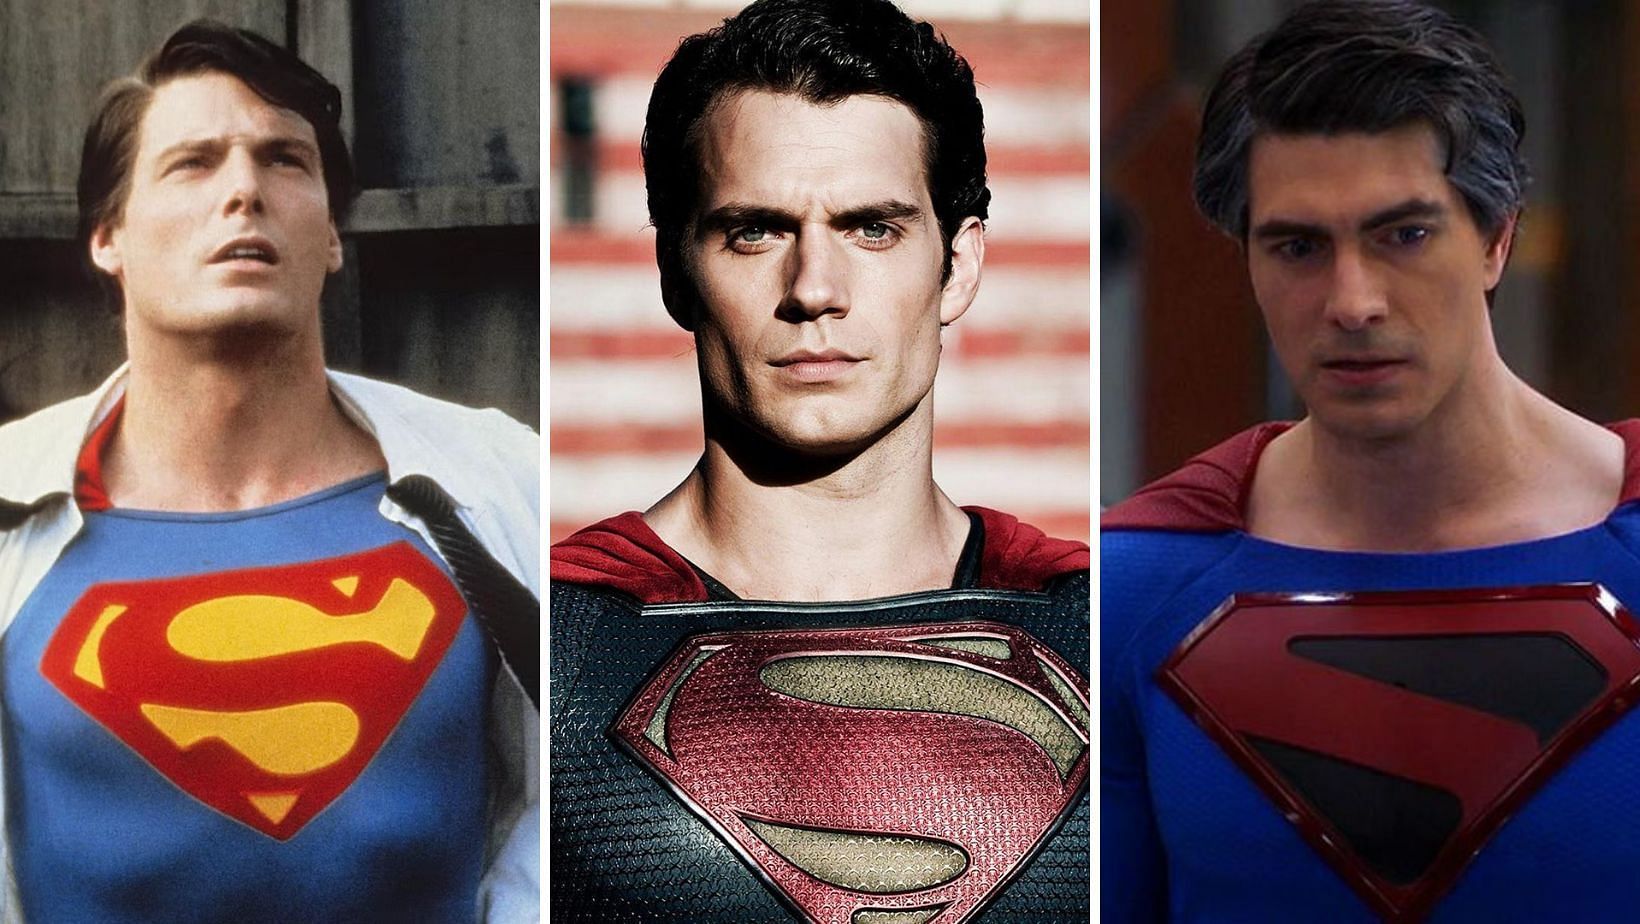 All Superman actors in the order they were casted